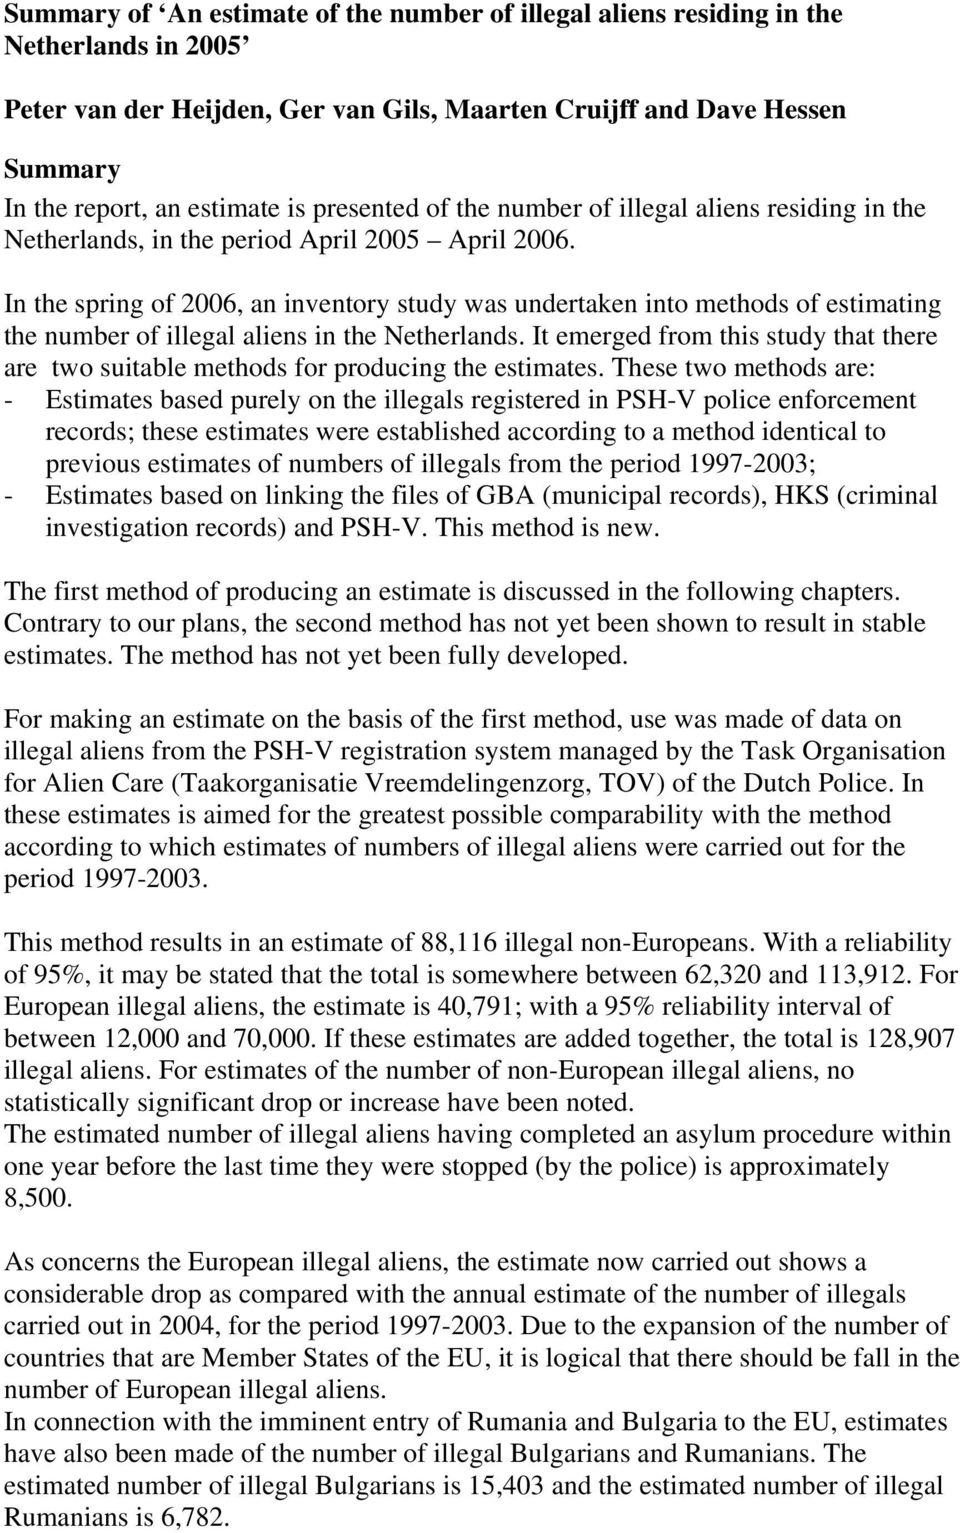 In the spring of 2006, an inventory study was undertaken into methods of estimating the number of illegal aliens in the Netherlands.